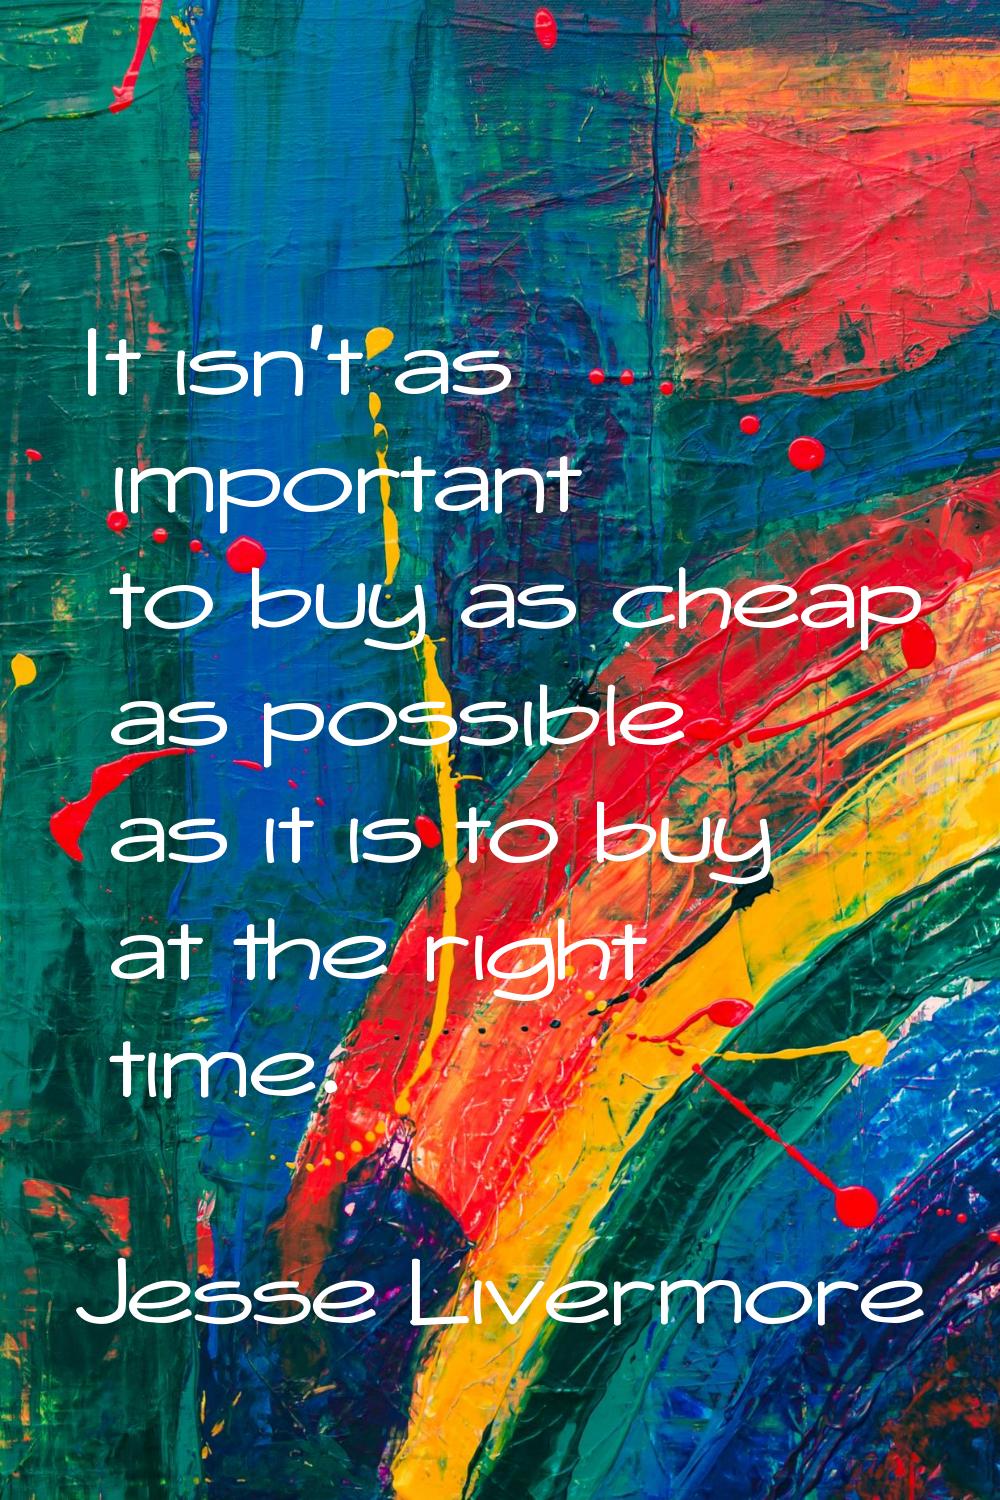 It isn't as important to buy as cheap as possible as it is to buy at the right time.